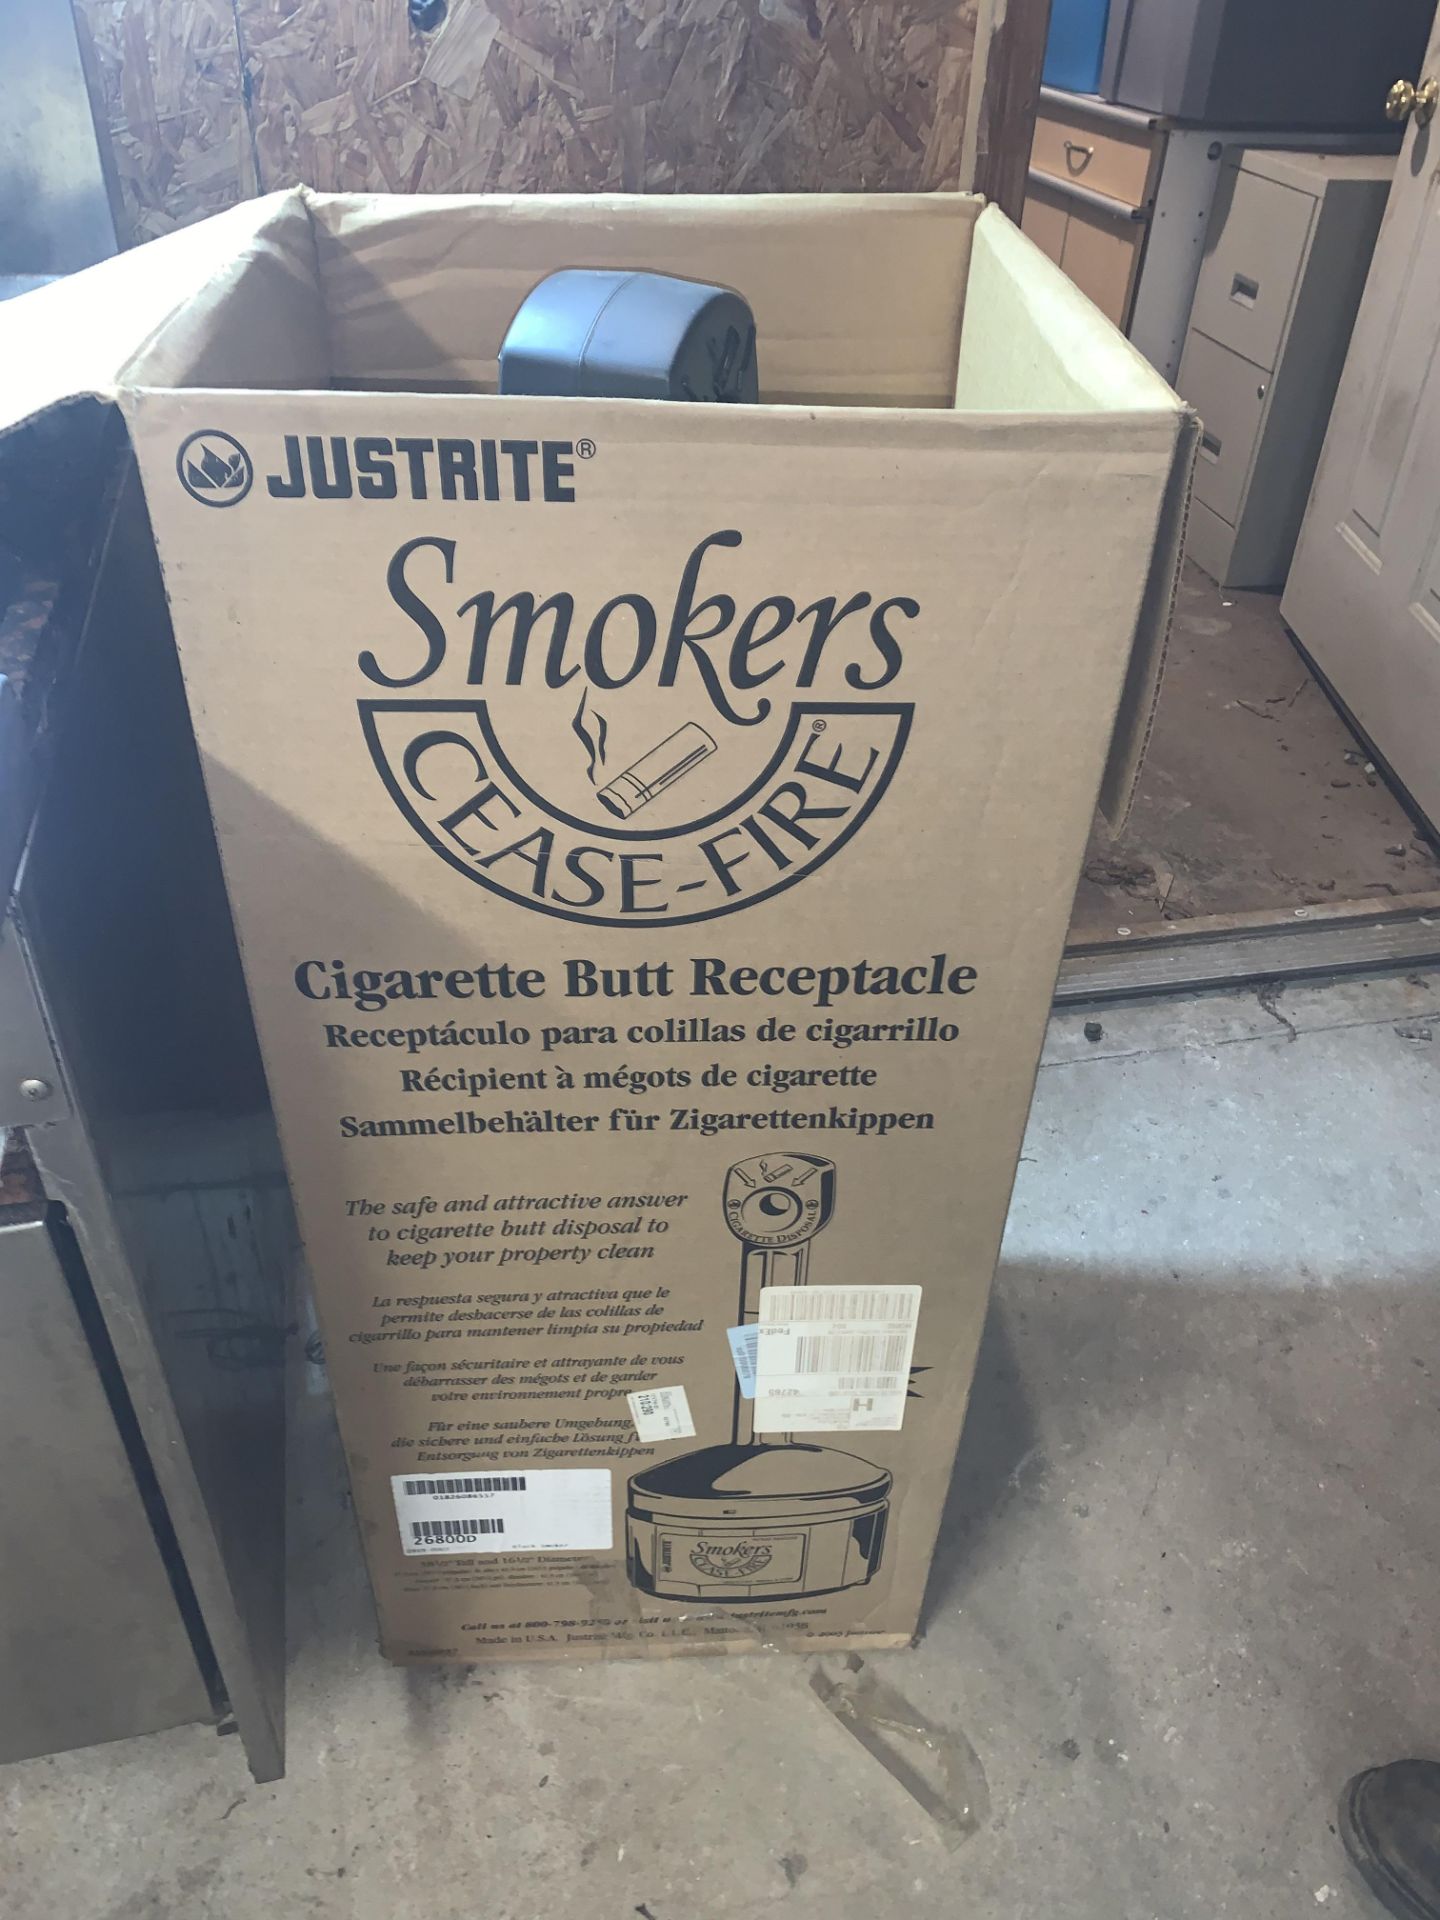 JUSTRITE Smoker's Cease Fire Cigarette Butt Receptacle - Image 2 of 2